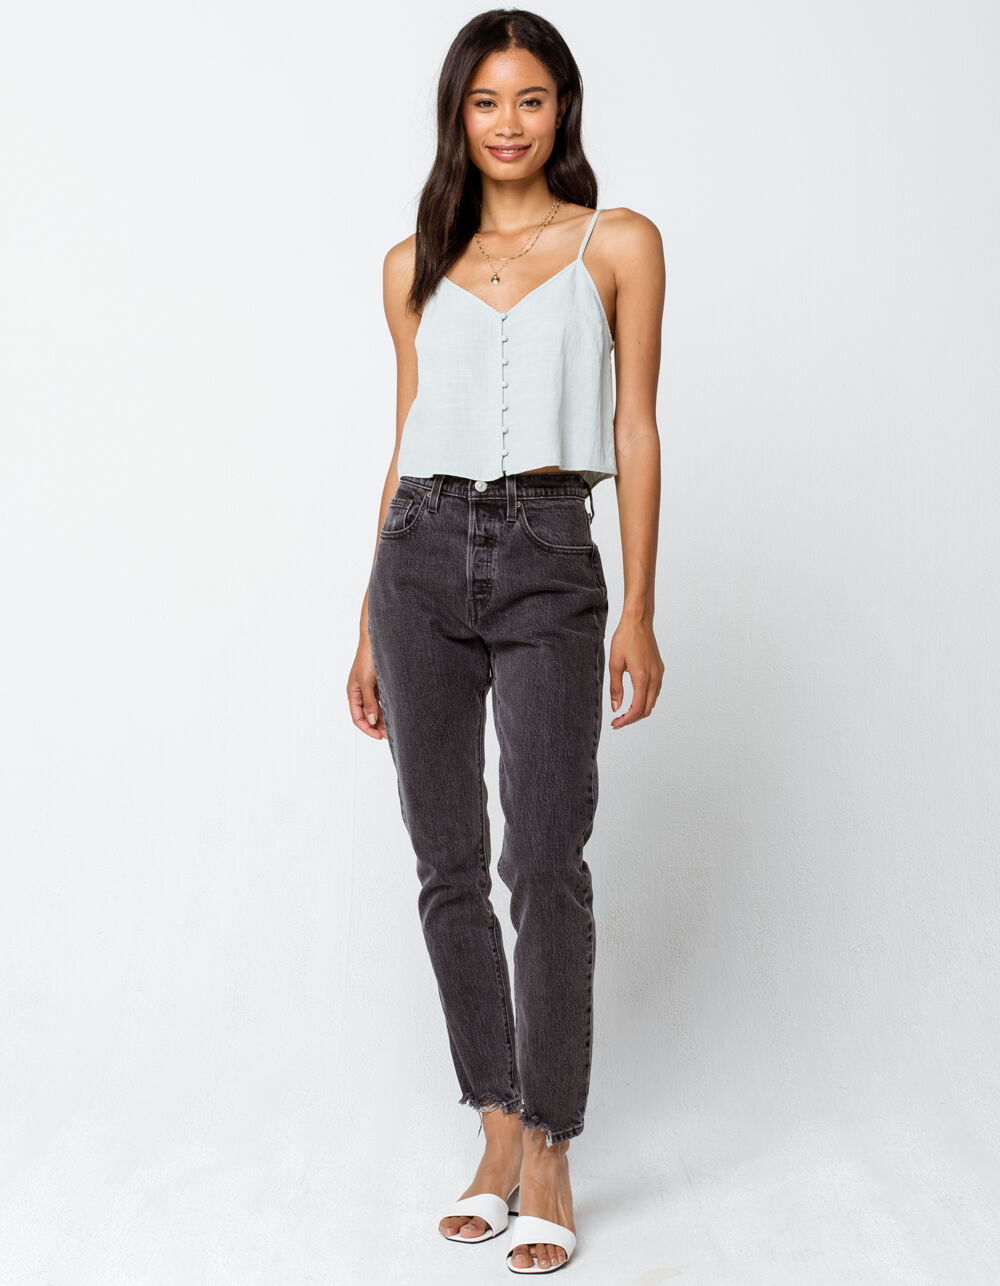 SKY AND SPARROW Solid Button Front Womens Sage Crop Cami - SAGE | Tillys